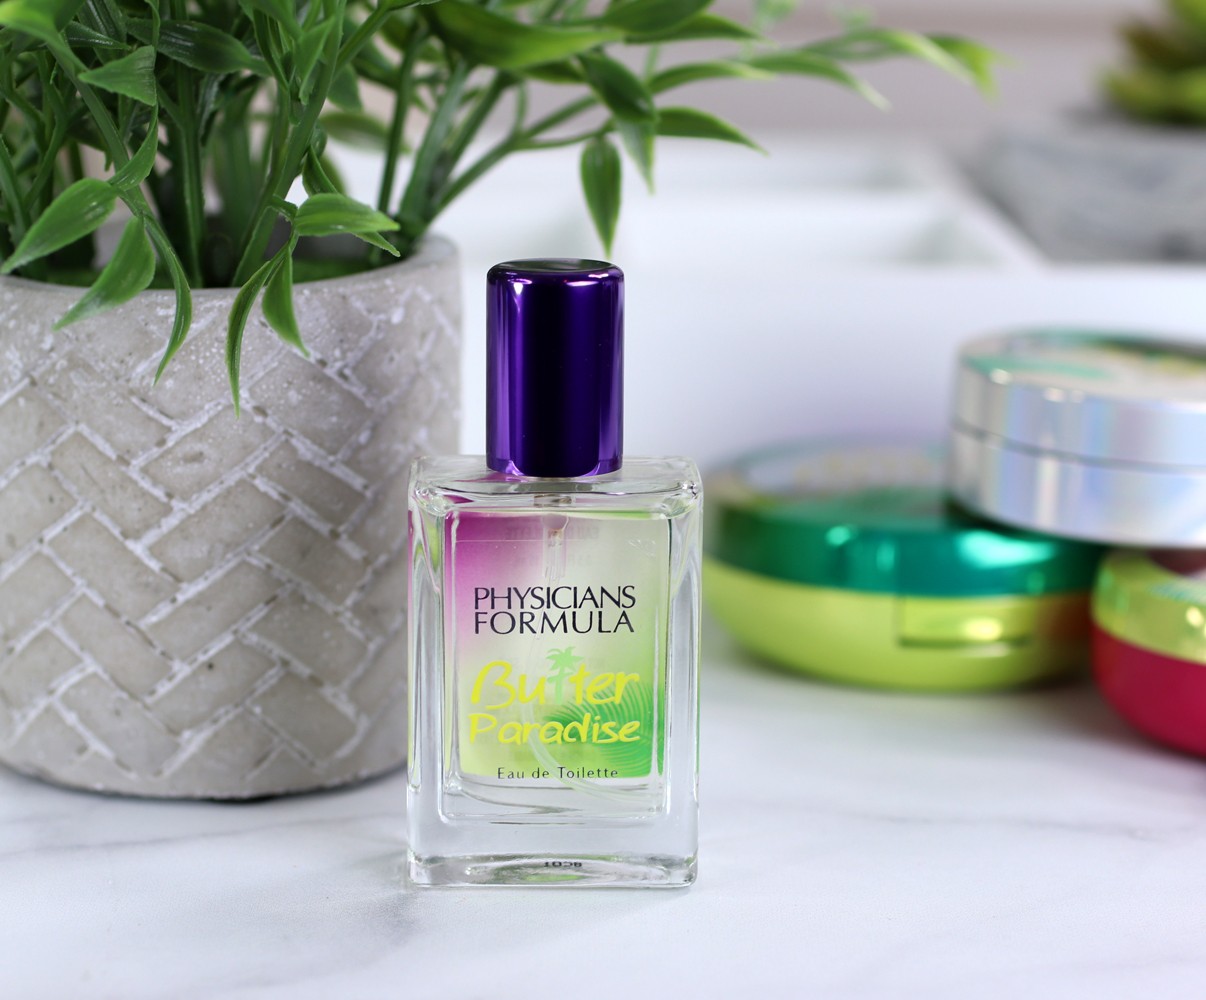 Butter Paradise Perfume by Physicians Formula